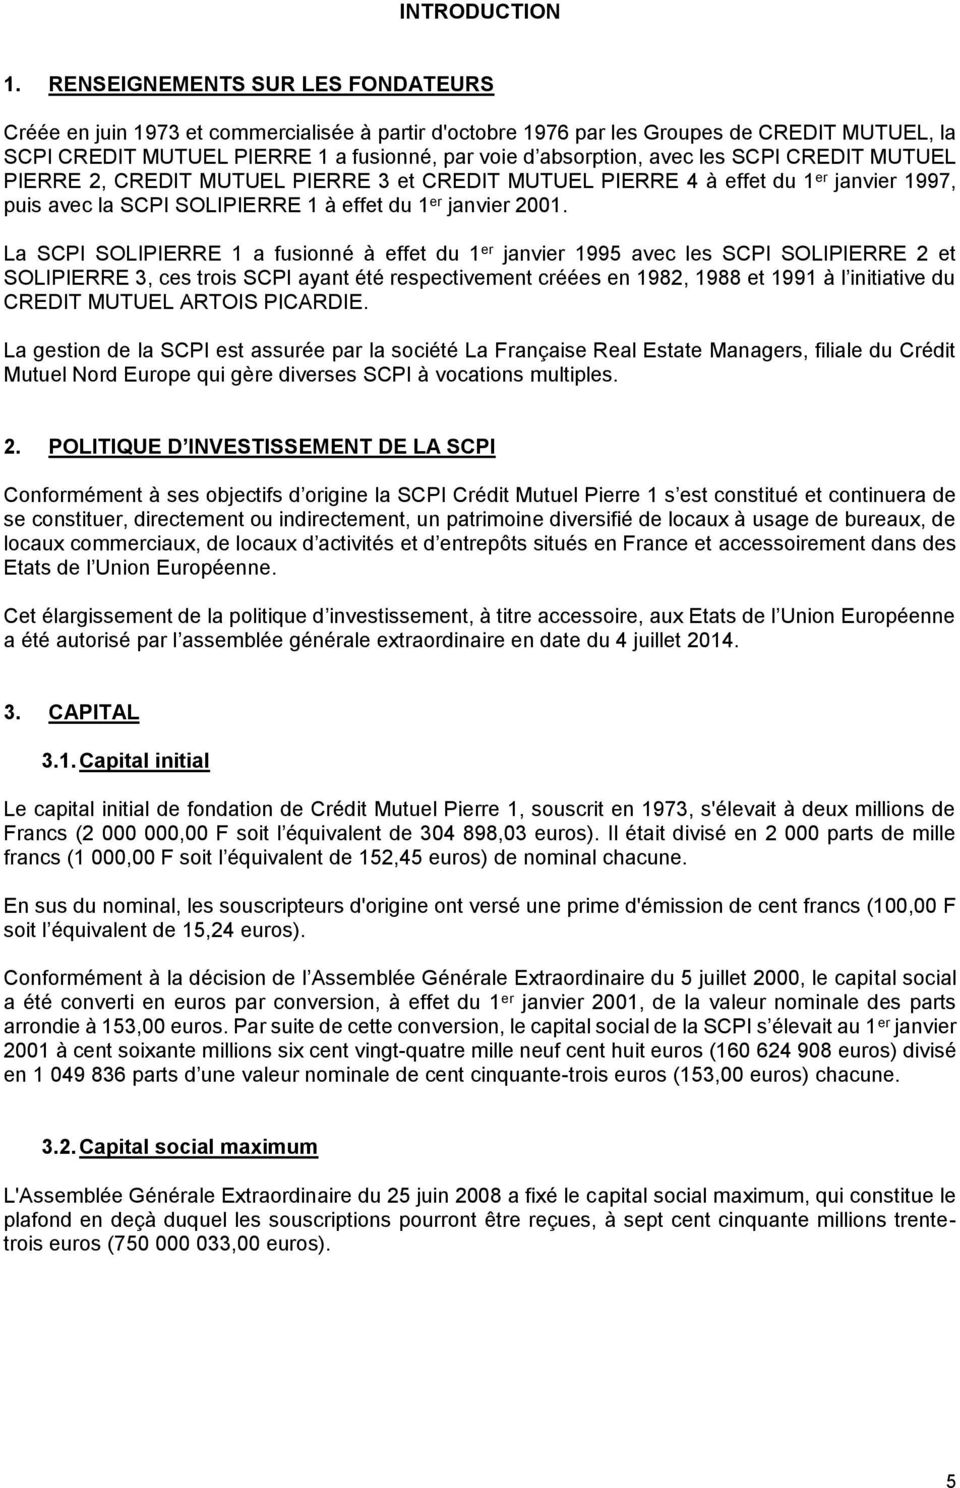 les SCPI CREDIT MUTUEL PIERRE 2, CREDIT MUTUEL PIERRE 3 et CREDIT MUTUEL PIERRE 4 à effet du 1 er janvier 1997, puis avec la SCPI SOLIPIERRE 1 à effet du 1 er janvier 2001.